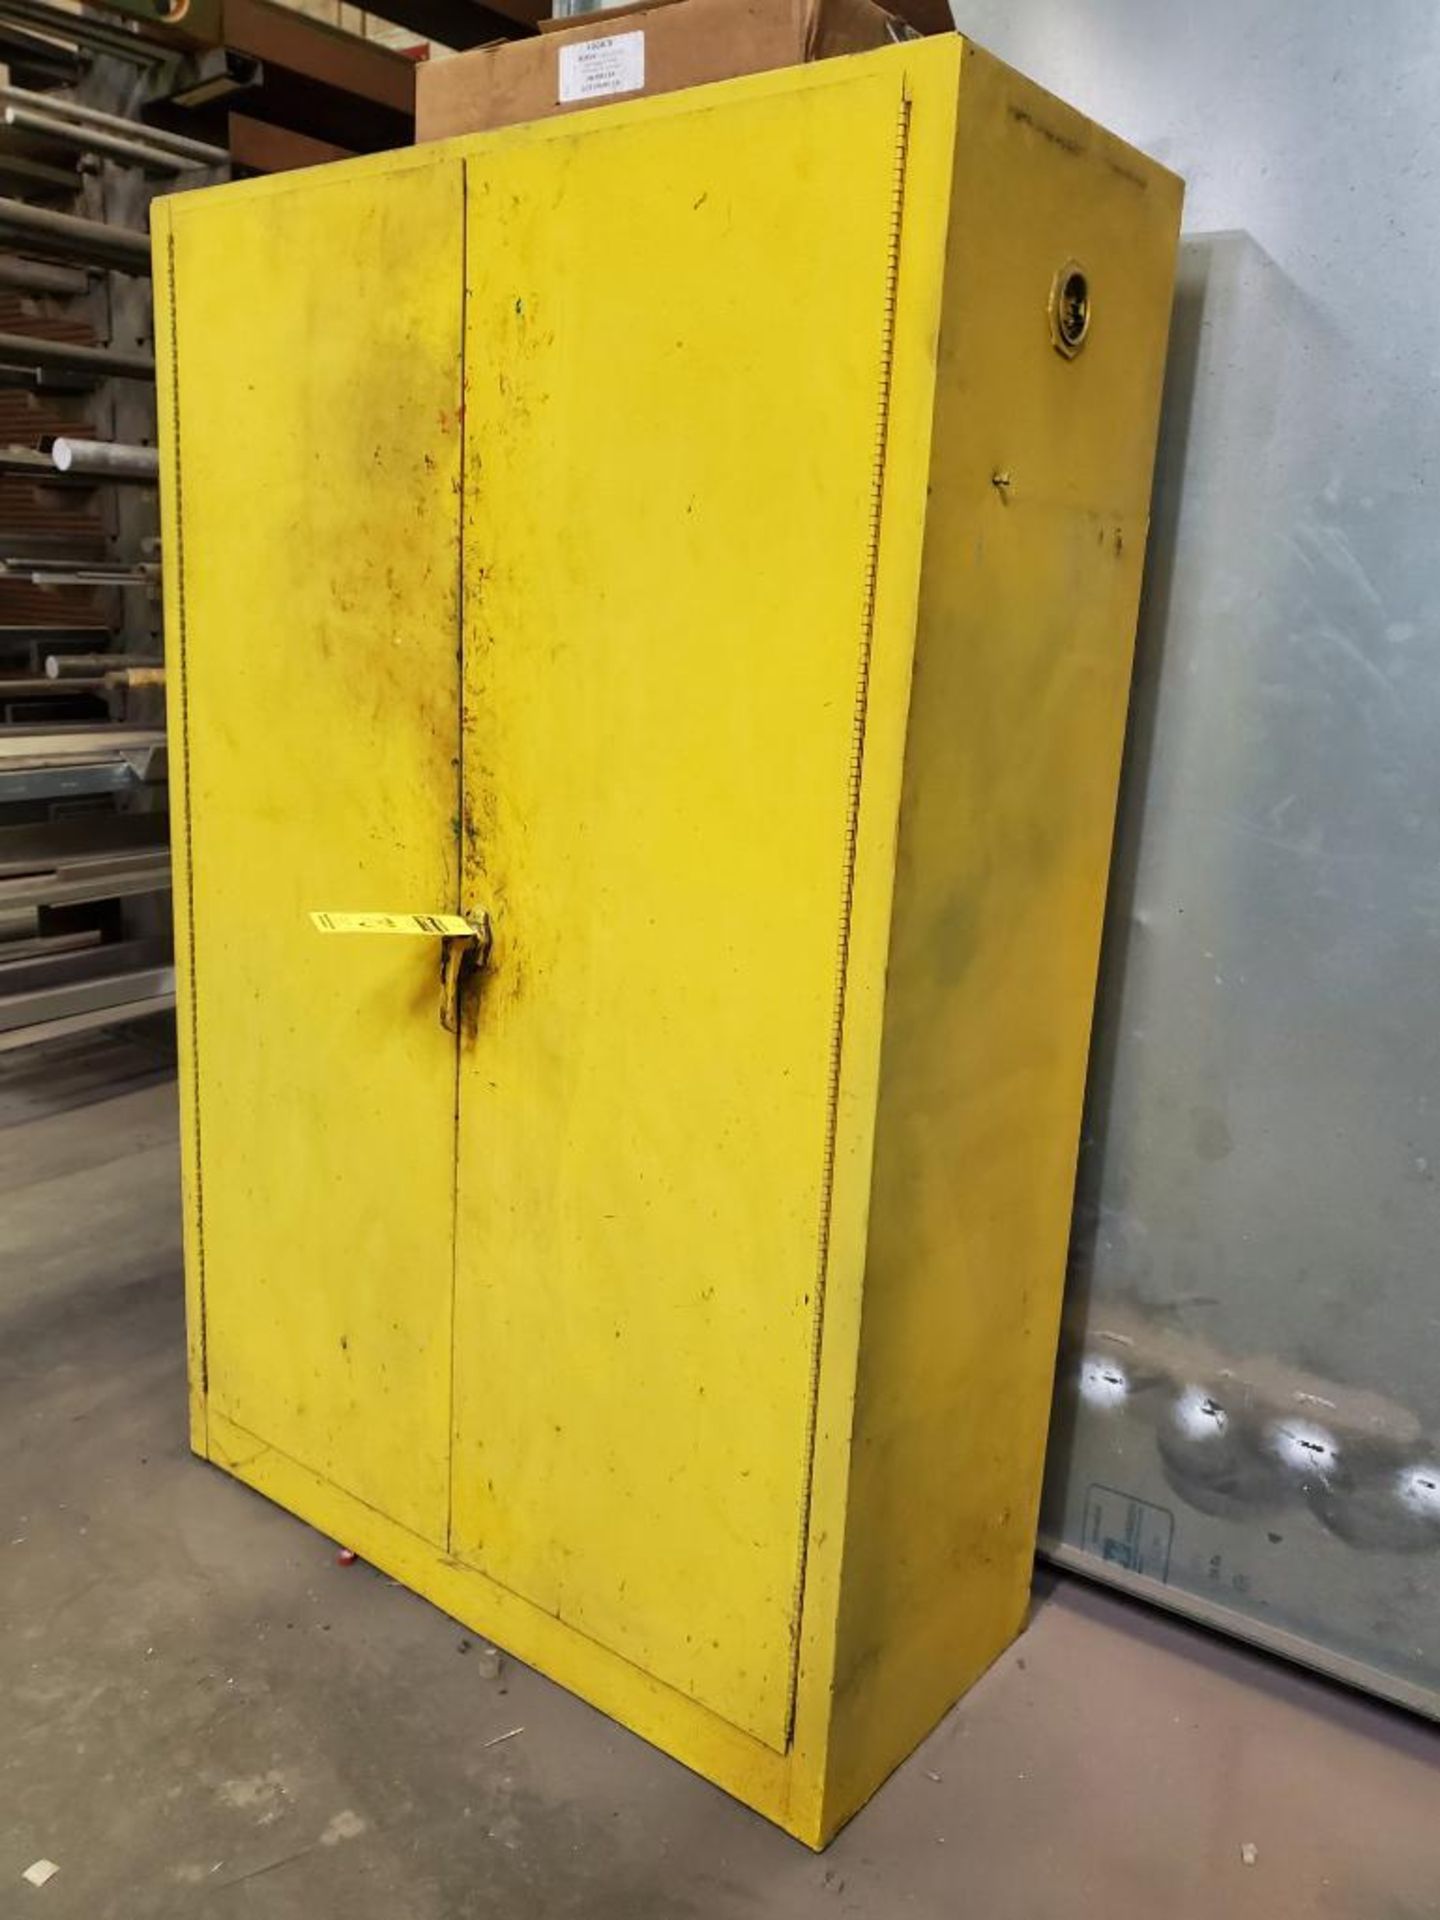 Justrite Flammable Storage Cabinet w/ Contents - Image 2 of 5